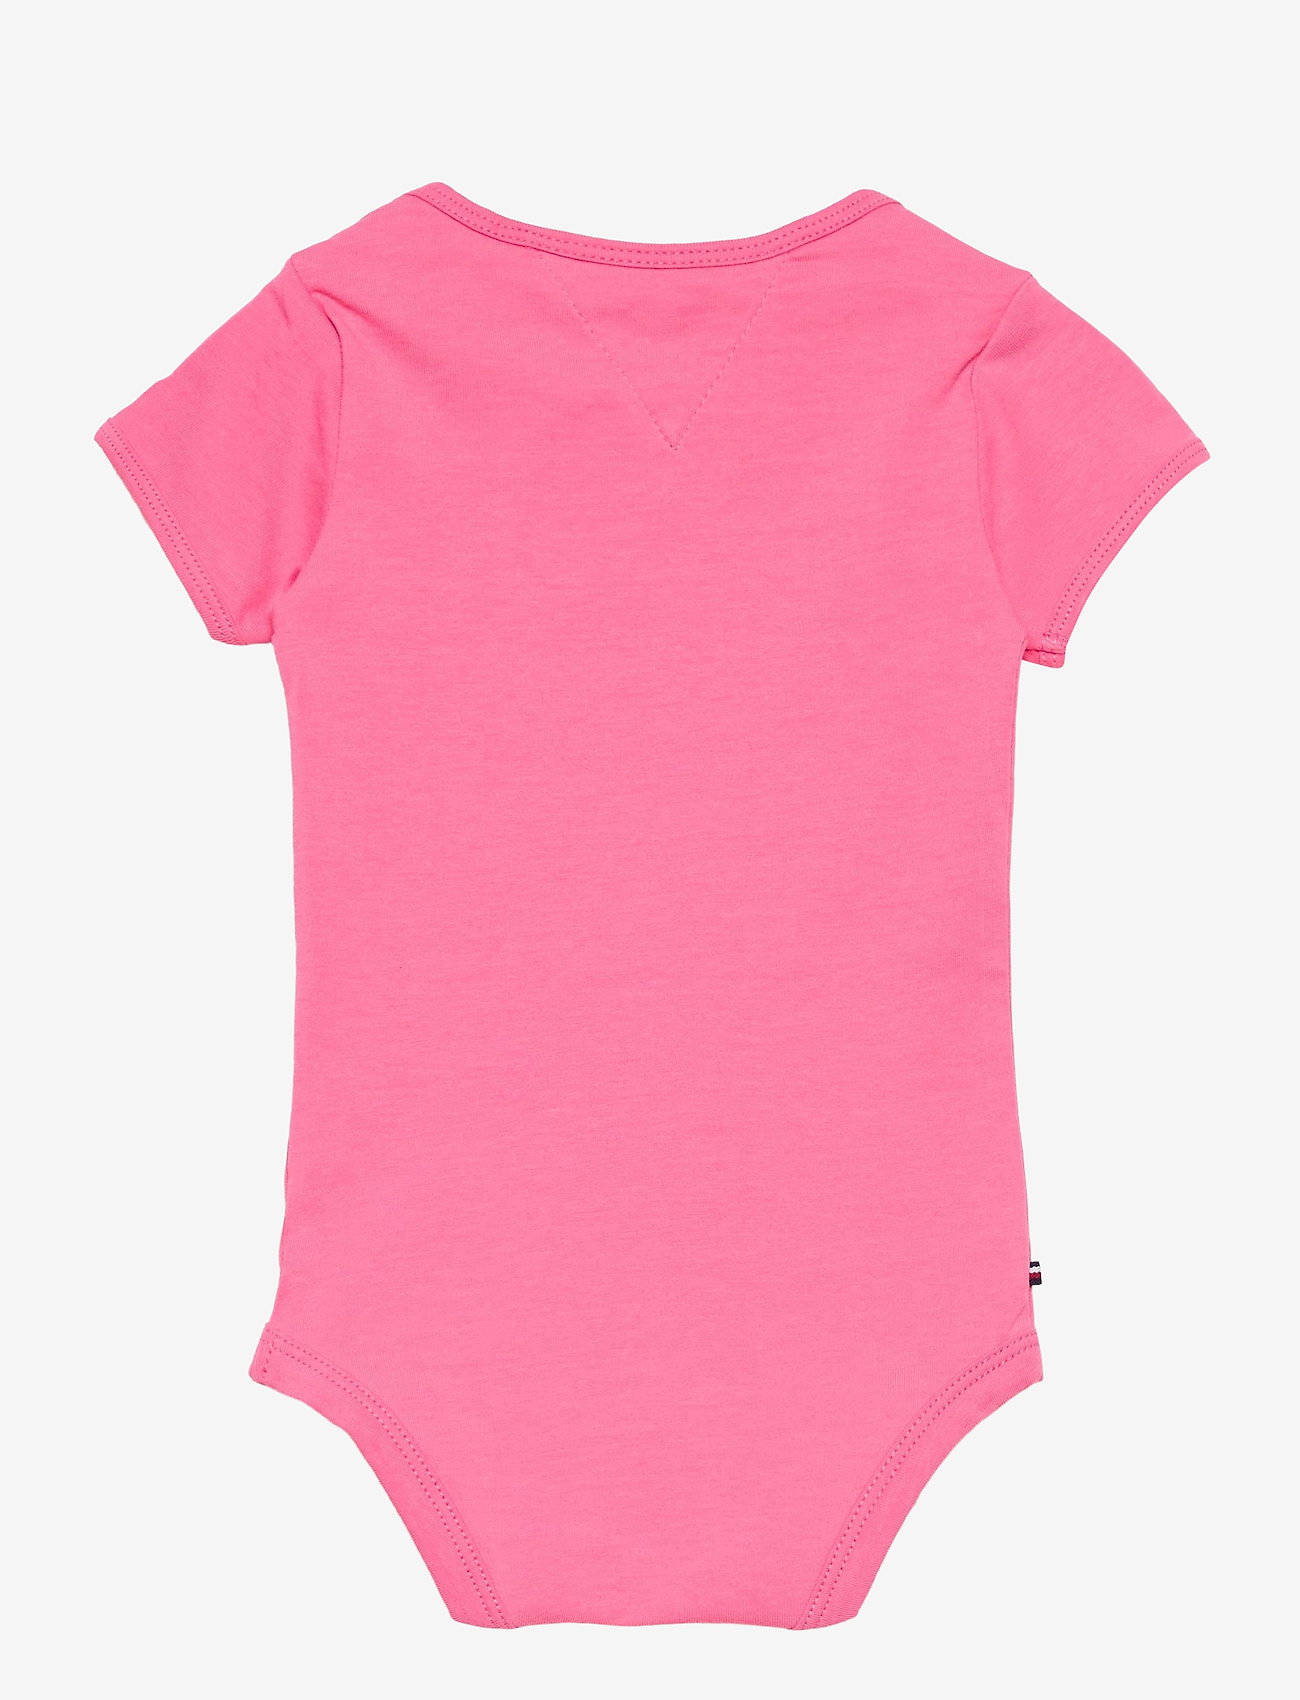 Baby Body S/s (Exotic Pink) (29.90 €) Tommy Hilfiger | Boozt.com